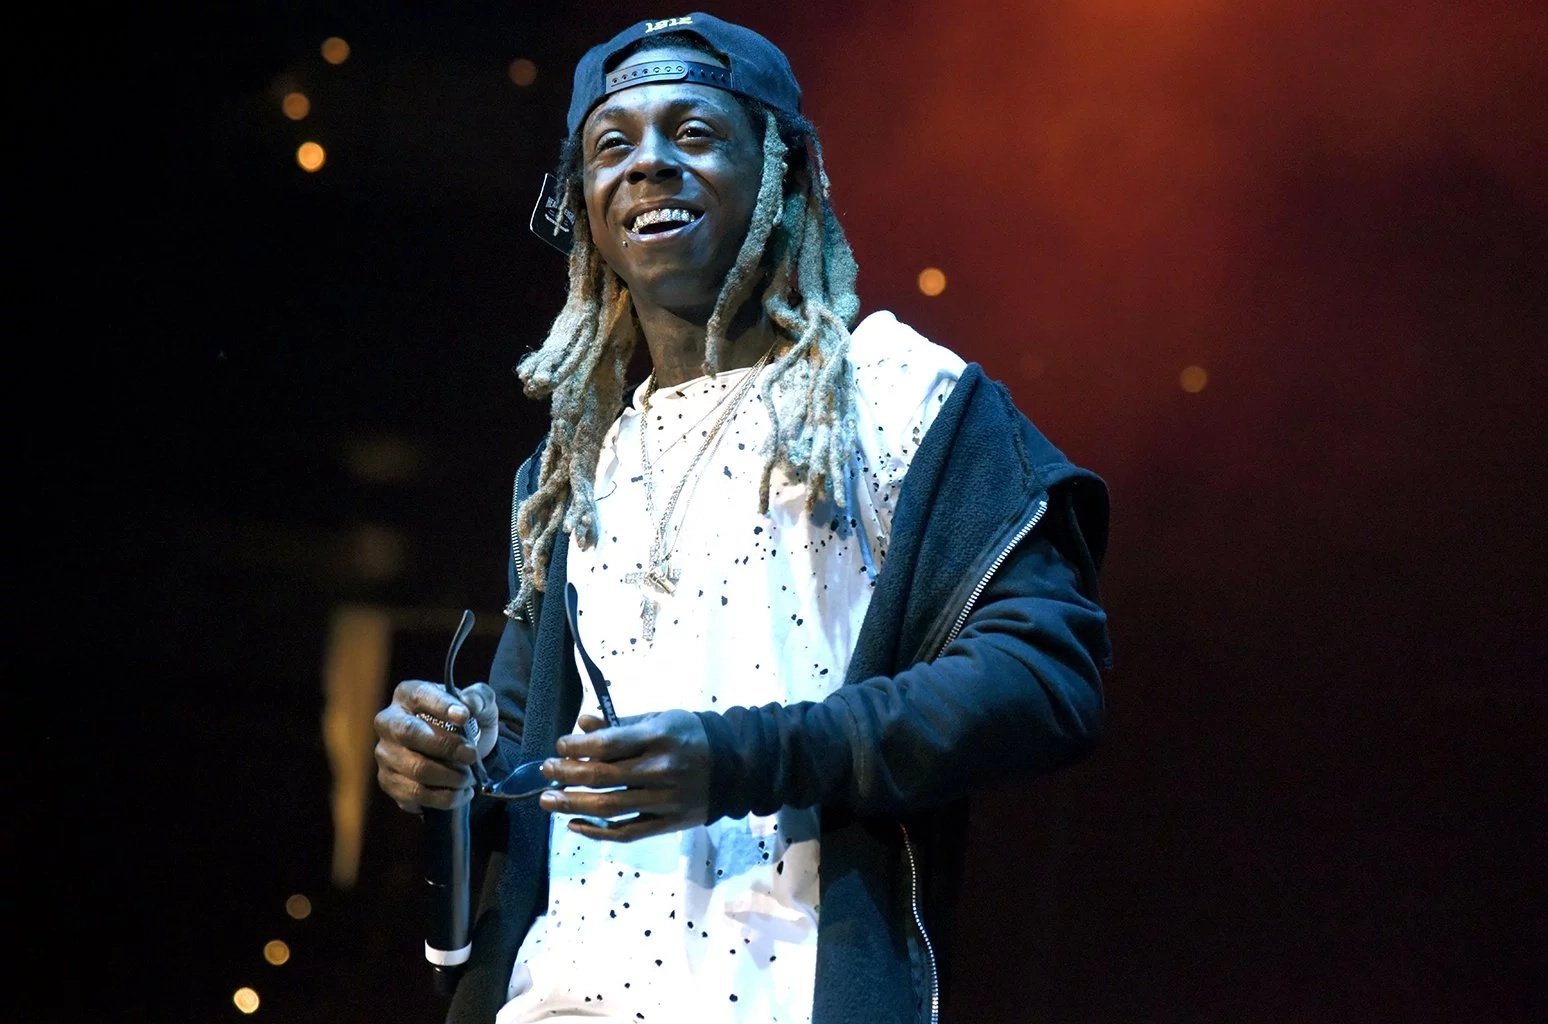 Lil Wayne Cancer: Is it Confirmed?